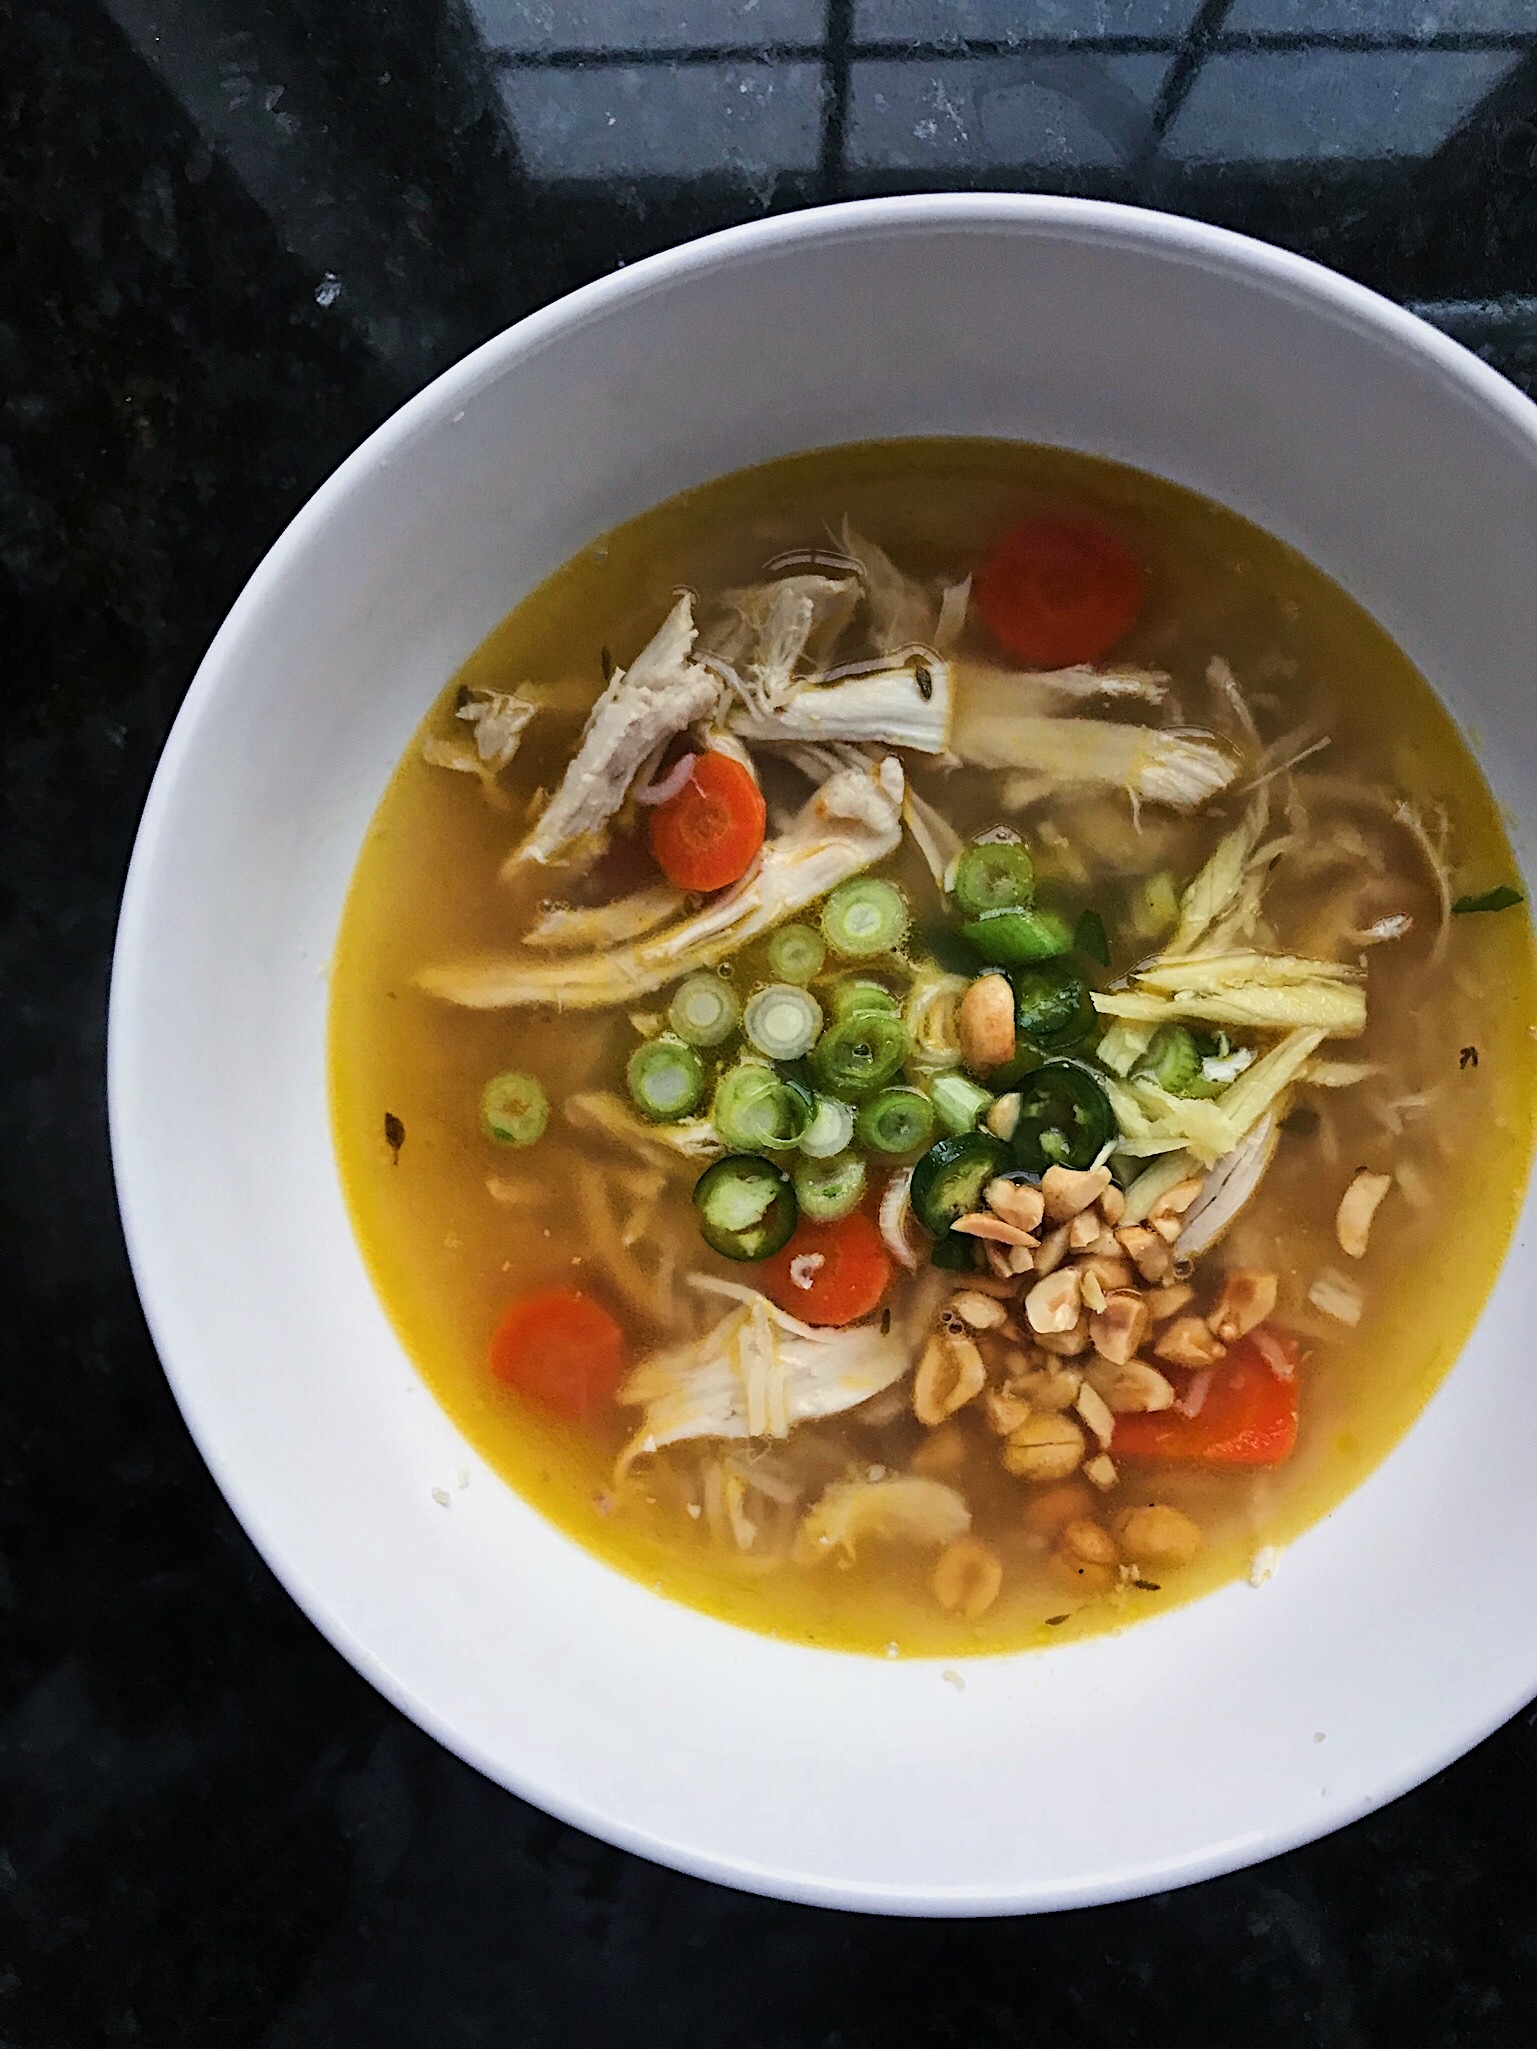 Chicken and Rice Soup With Green Chiles and Ginger Recipe